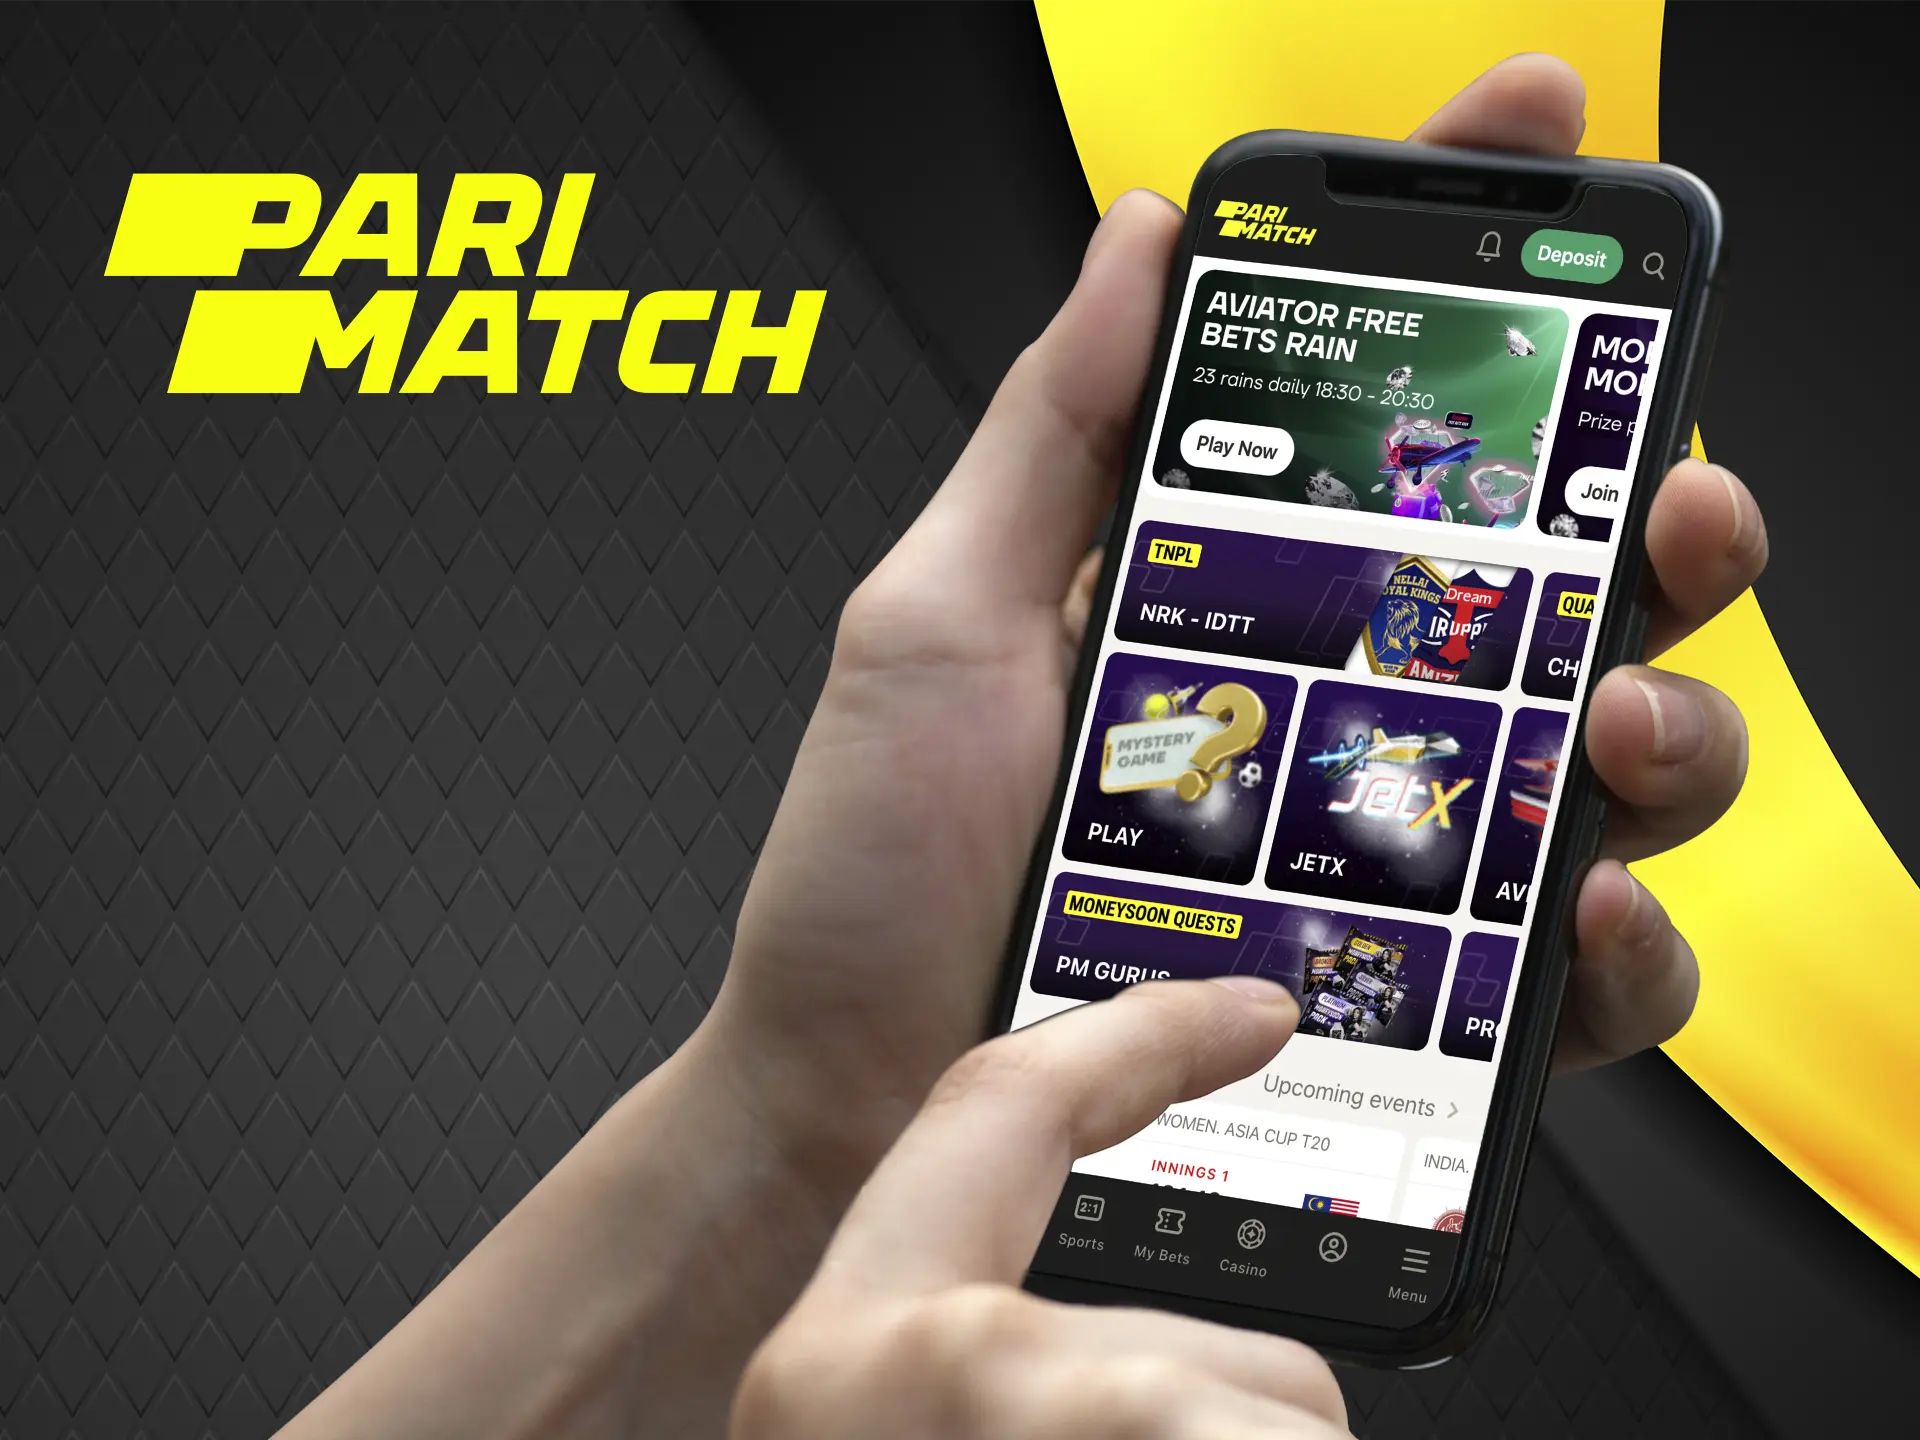 Analyse matches and place bets through the best Parimatch app.